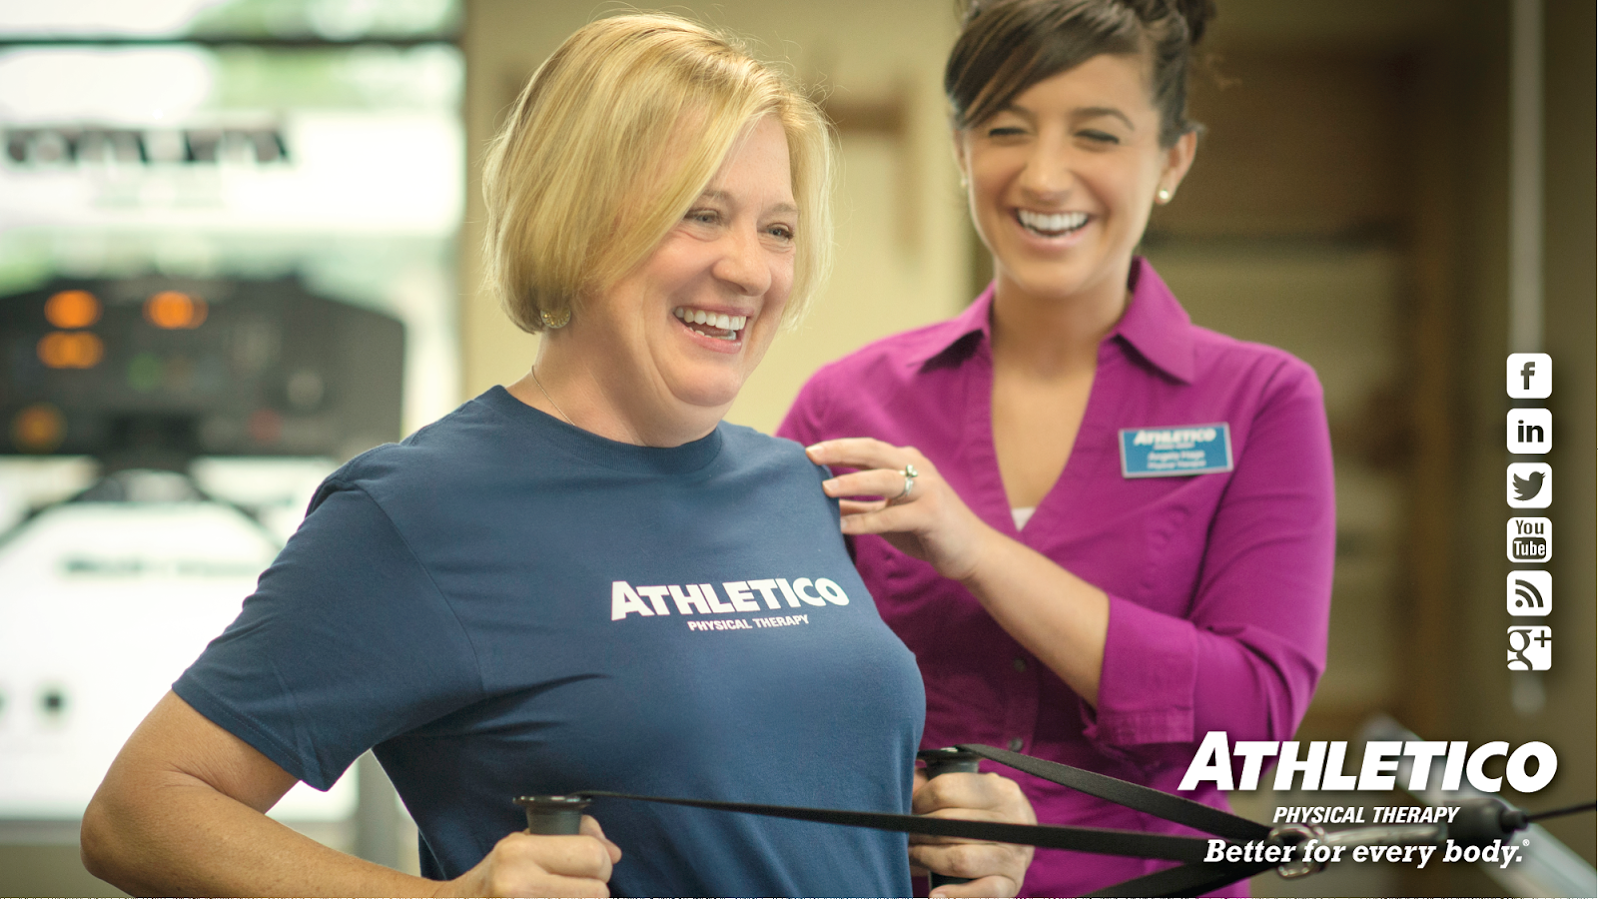 Athletico Physical Therapy - Bloomfield Hills 1940 S Telegraph Rd, Bloomfield Michigan 48302